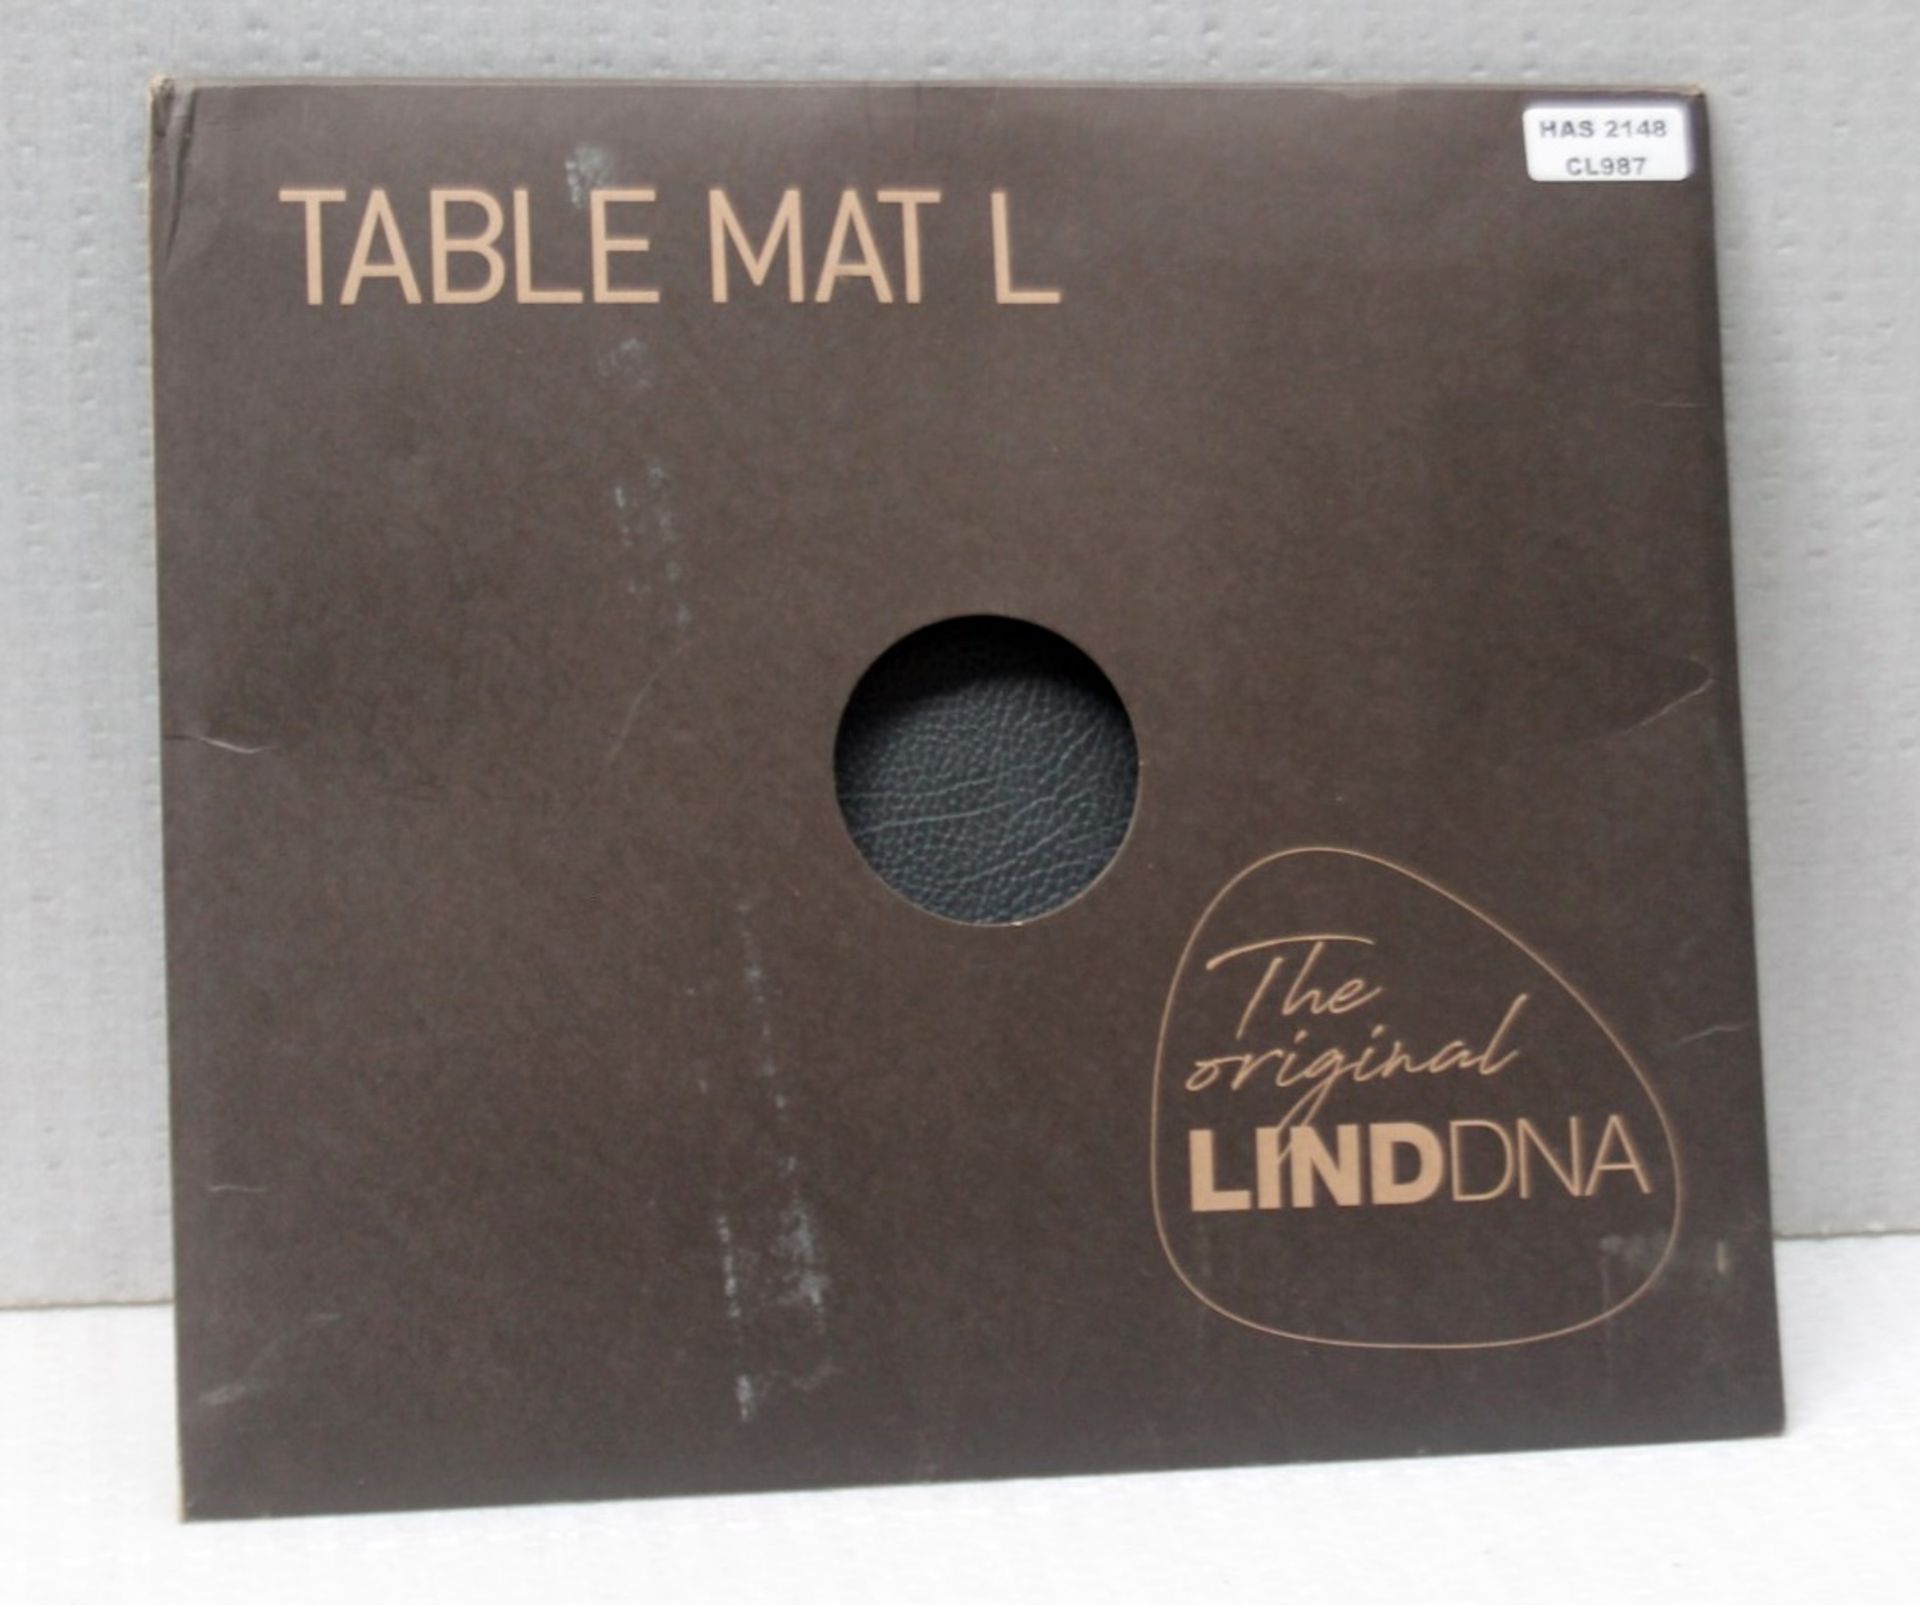 Set of 4 x LIND DNA 'Hippo' Leather Square Placemats Table Mats, In Black - Original Price £72.95 - Image 3 of 9